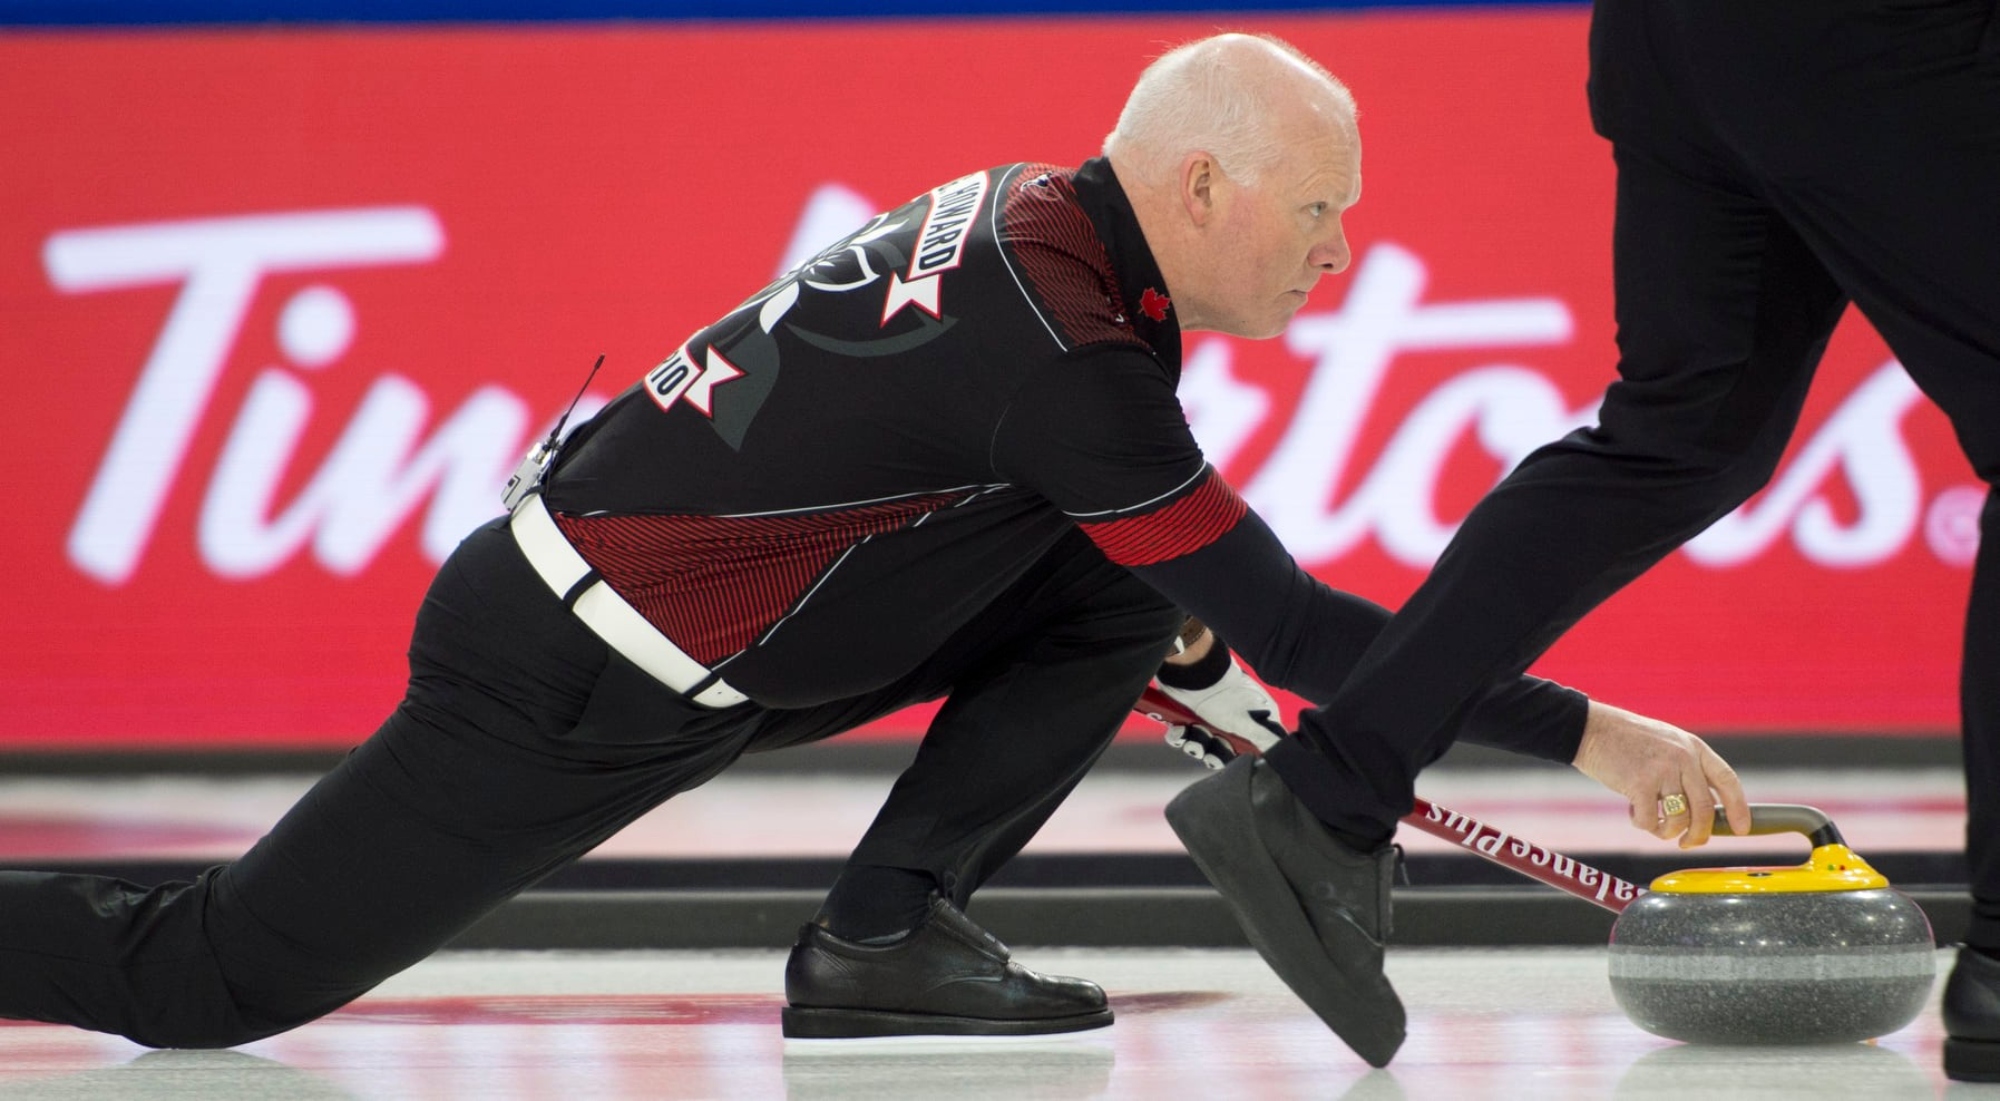 Disappointing loss ends Team Howards Brier hopes